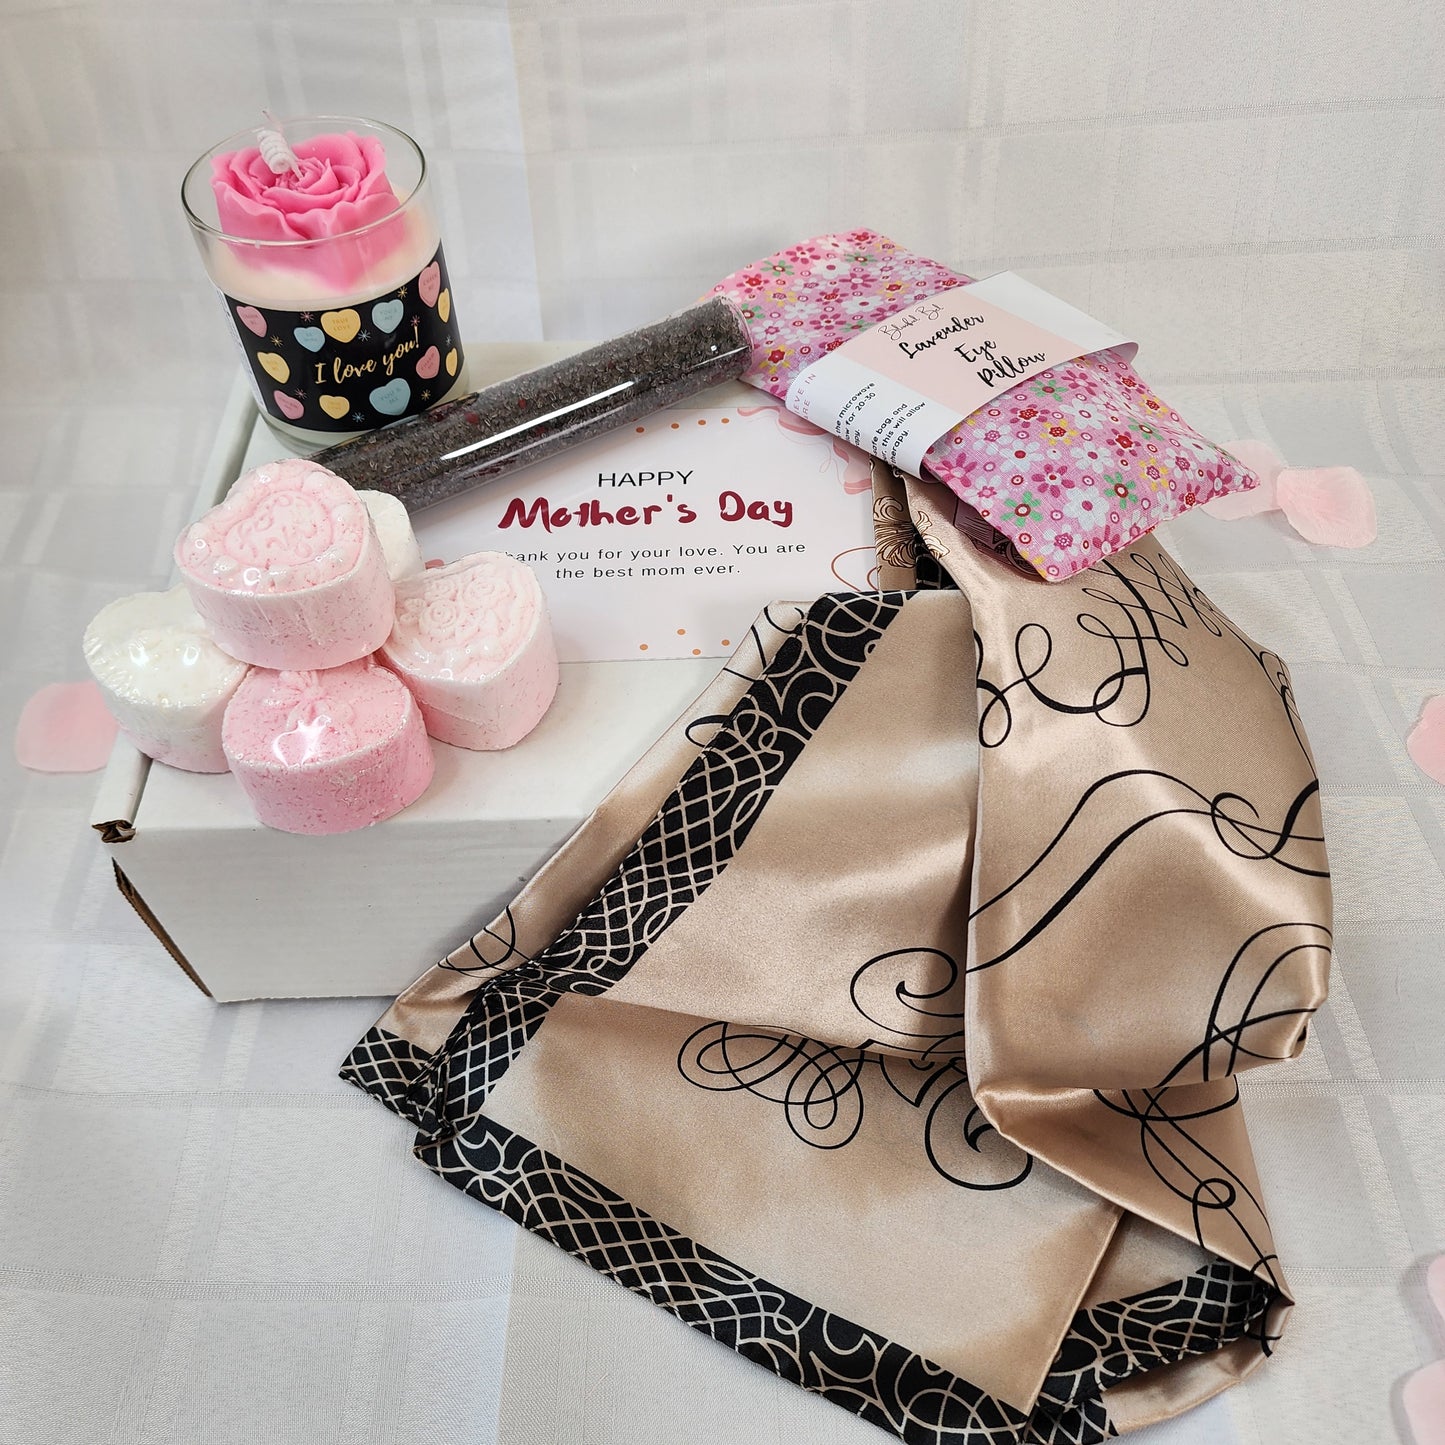 Gift Box for Mom